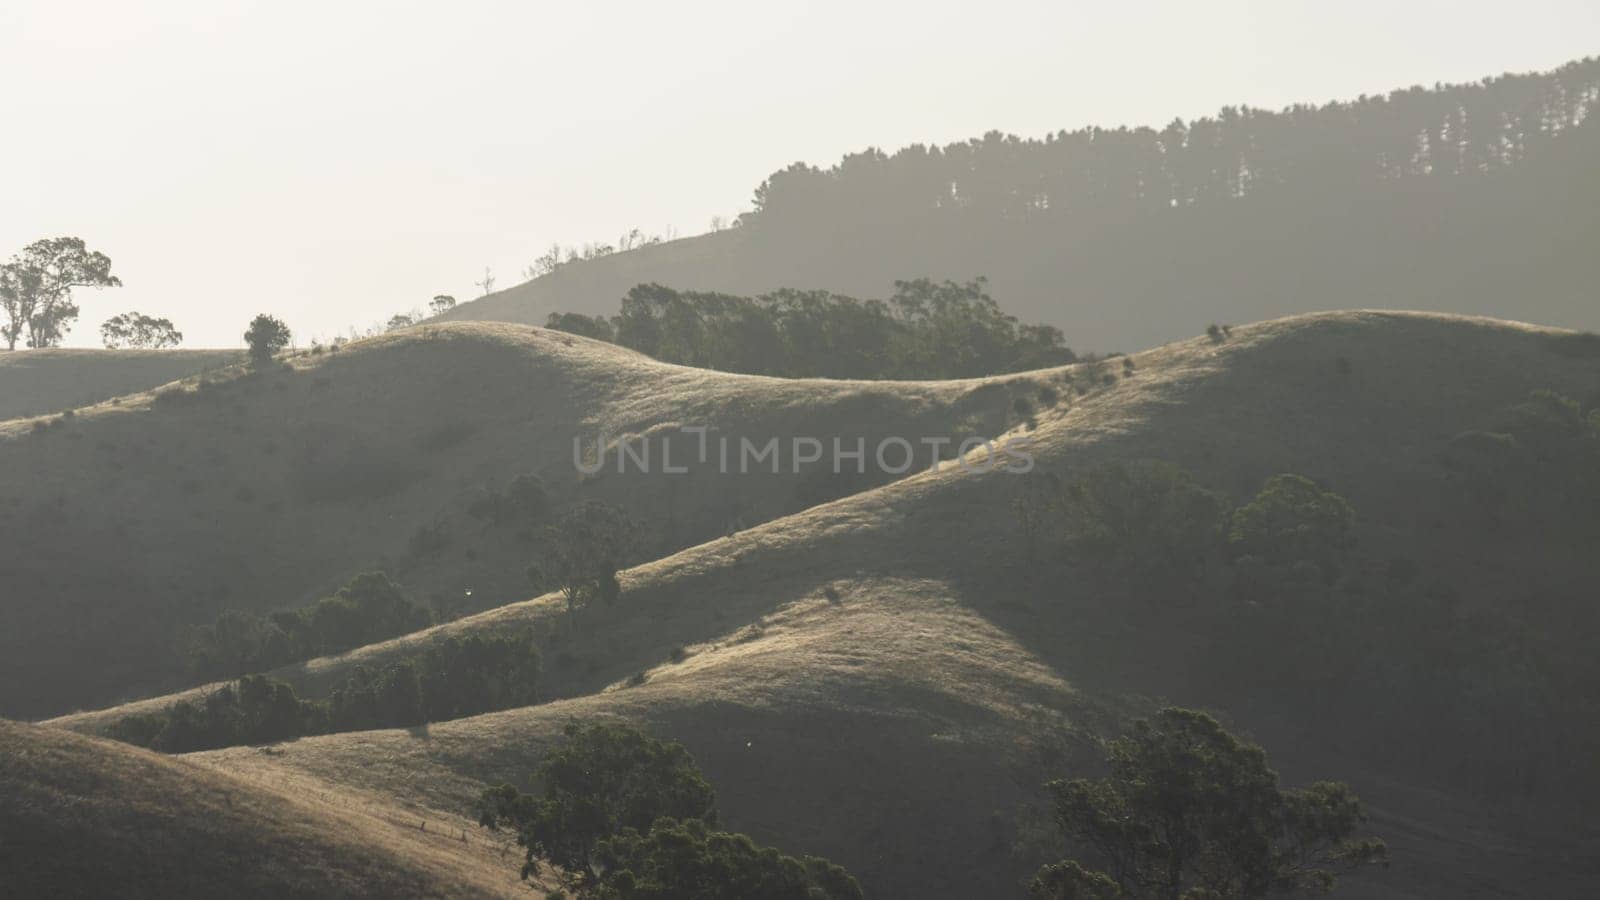 Gradients of sepia tones highlight layers of rolling hills in Bonnie Doon, Victoria, Australia. Sunlight lights up the trees and grass as the sun sets, with black, orange, grey and brown colours